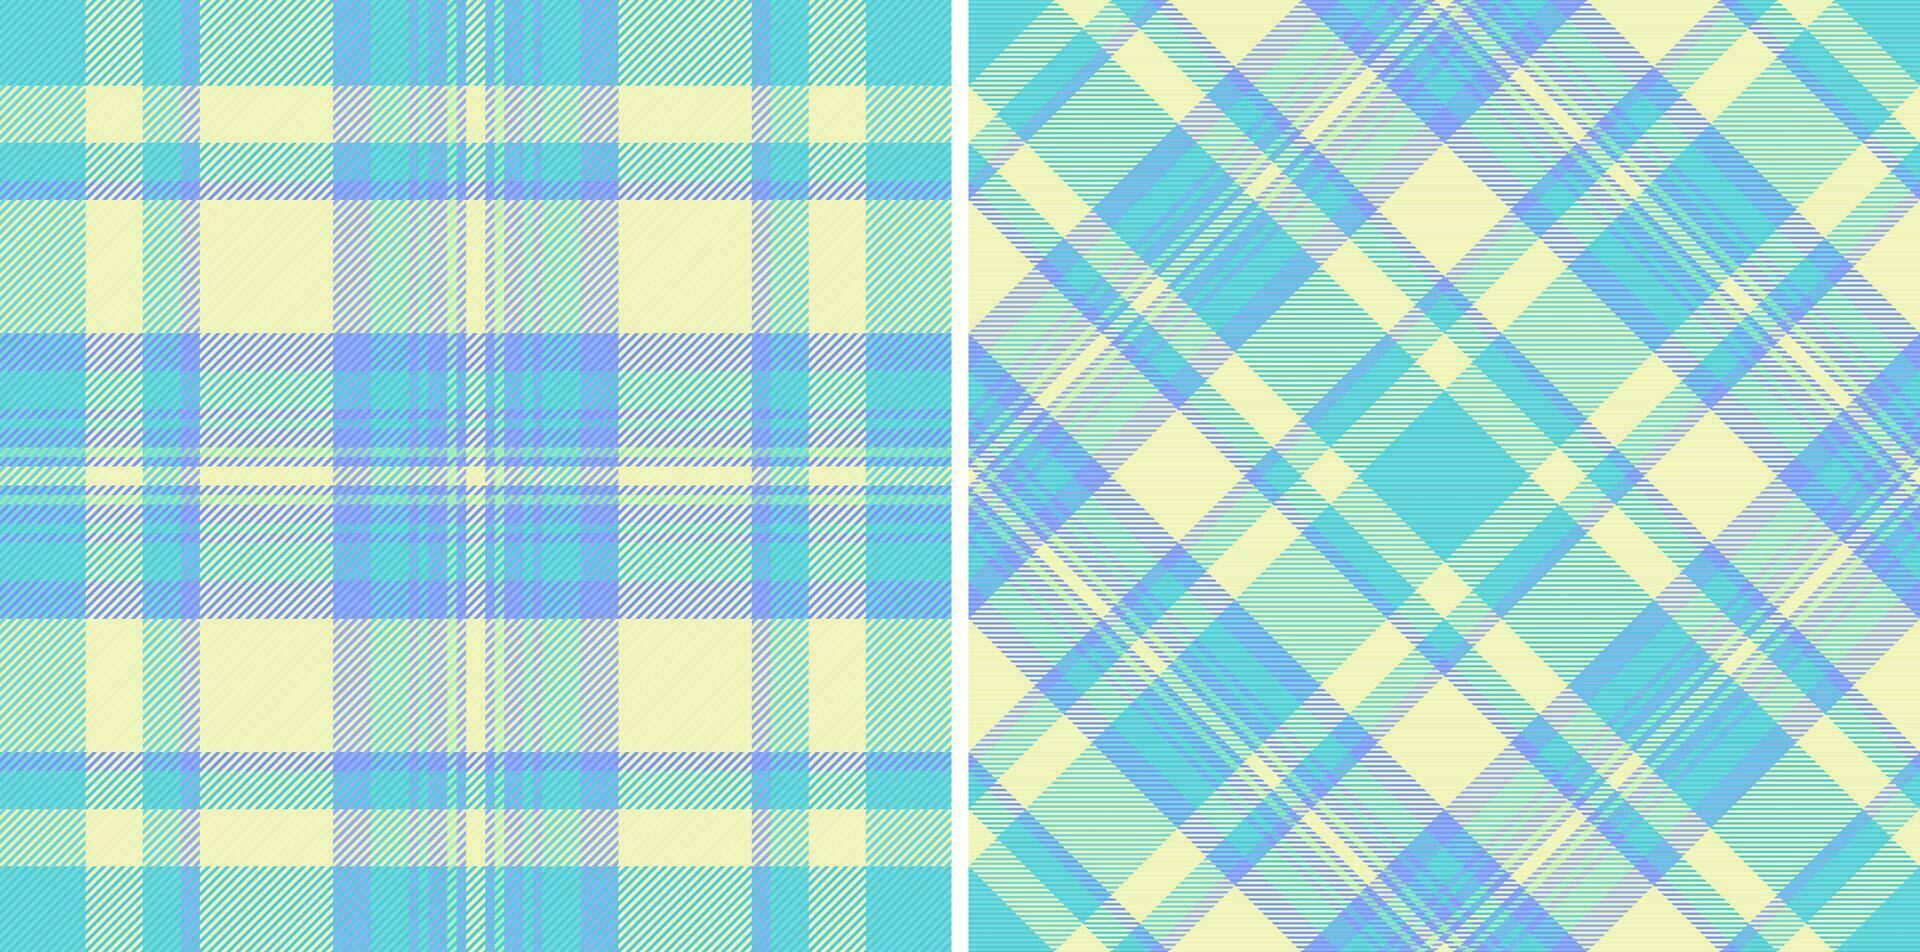 Texture check plaid of background seamless vector with a fabric pattern textile tartan.